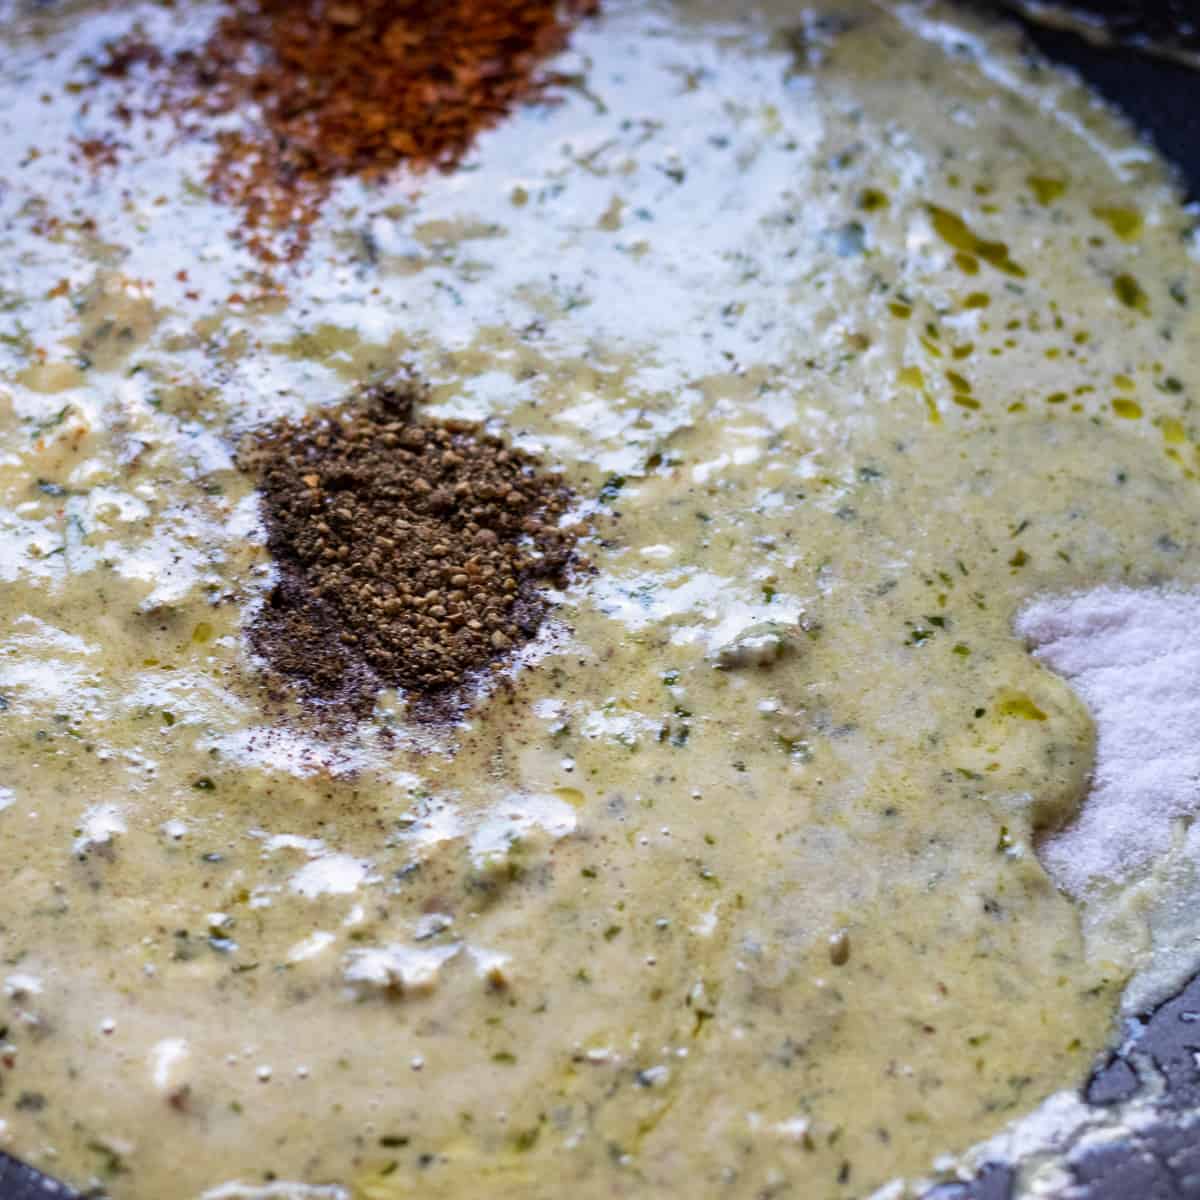 cream, mascarpone, parmesan, blue cheese and seasoning are added to the wok